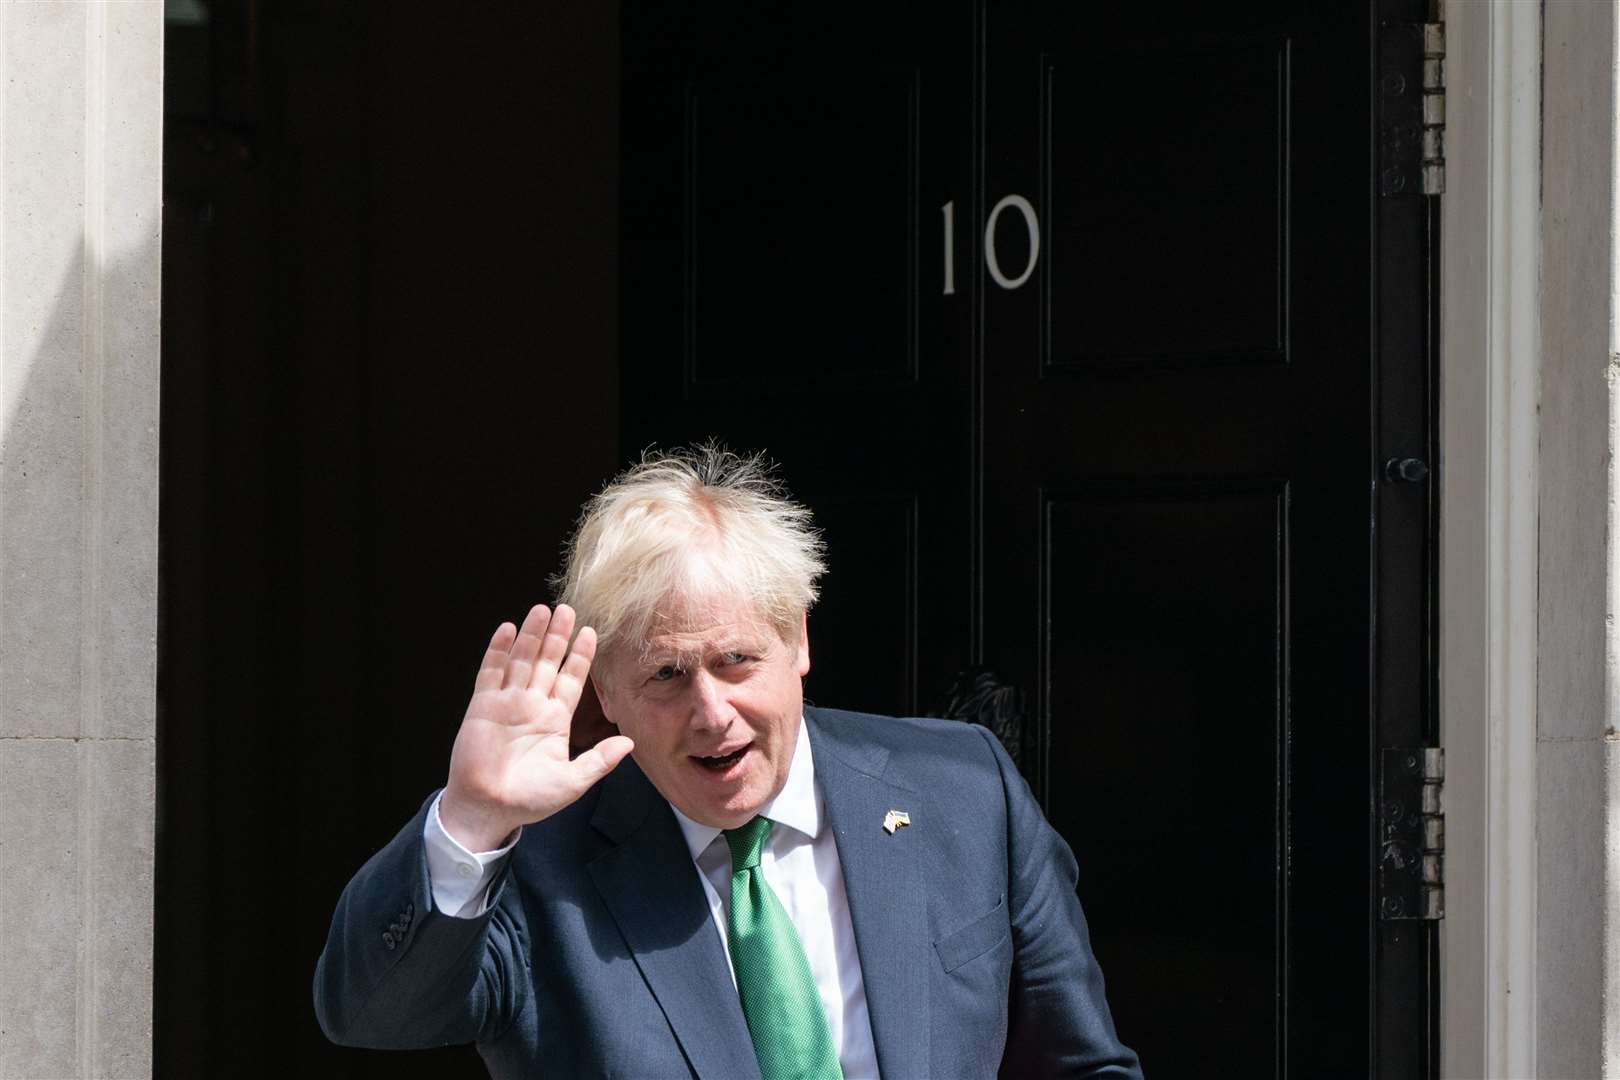 Prime Minister Boris Johnson has insisted his departure from Downing Street will not be the end of Brexit (Dominic Lipinski/PA)